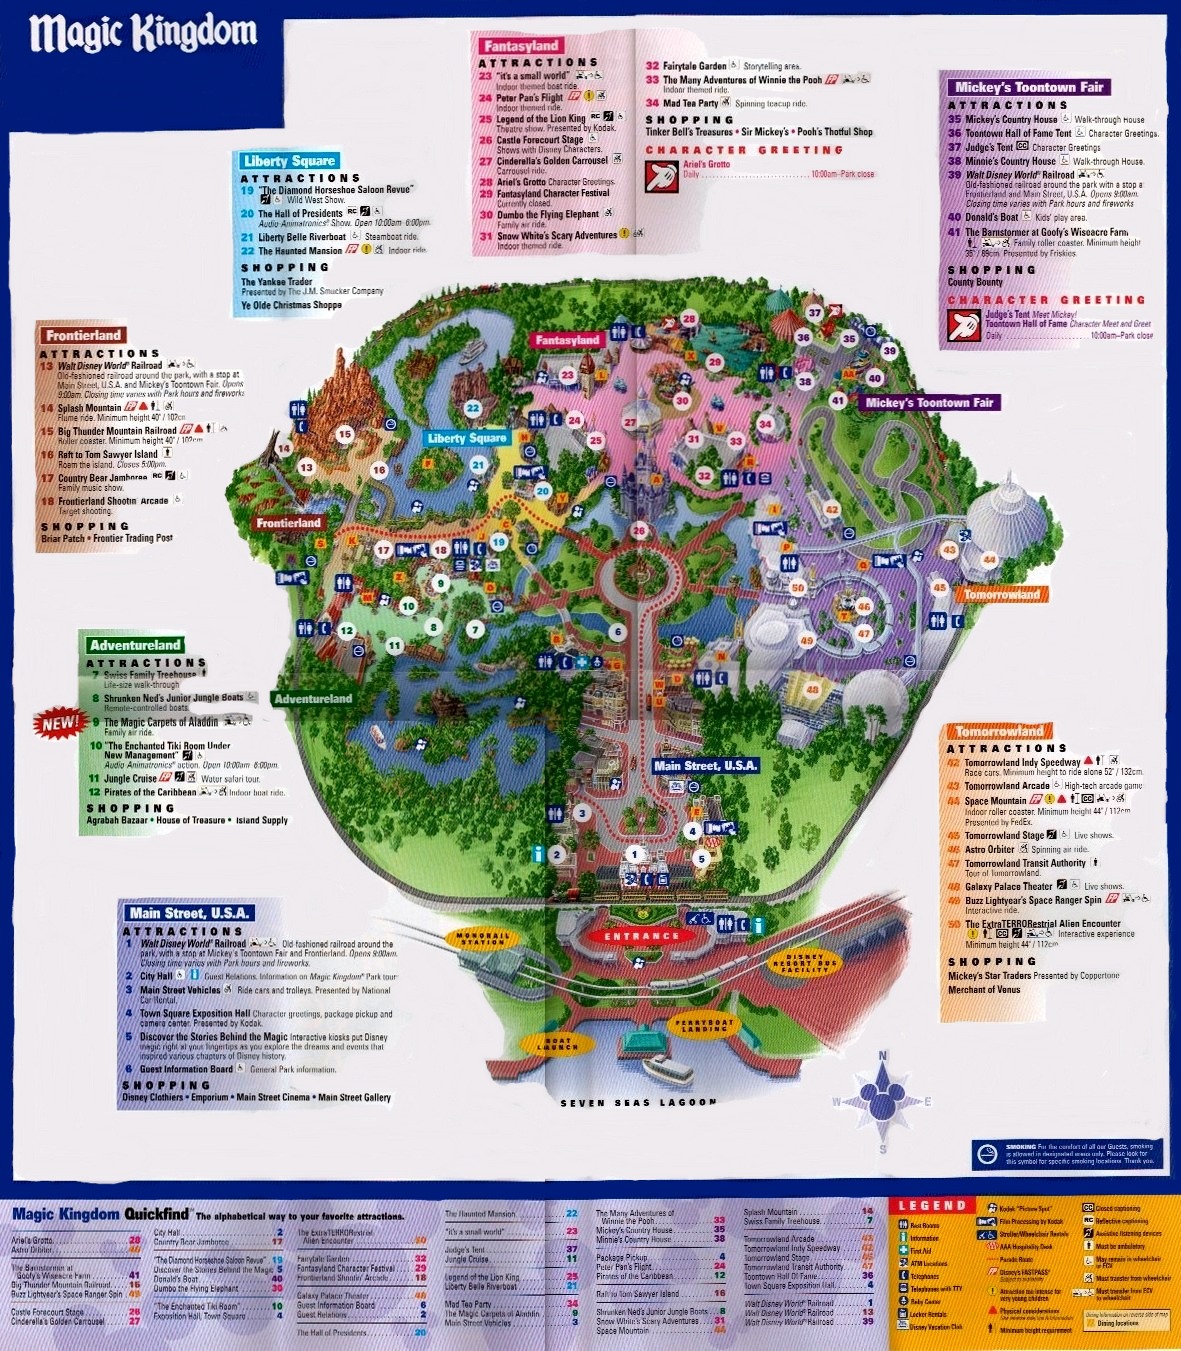 Magic Kingdom Park Map (click on map for larger view)